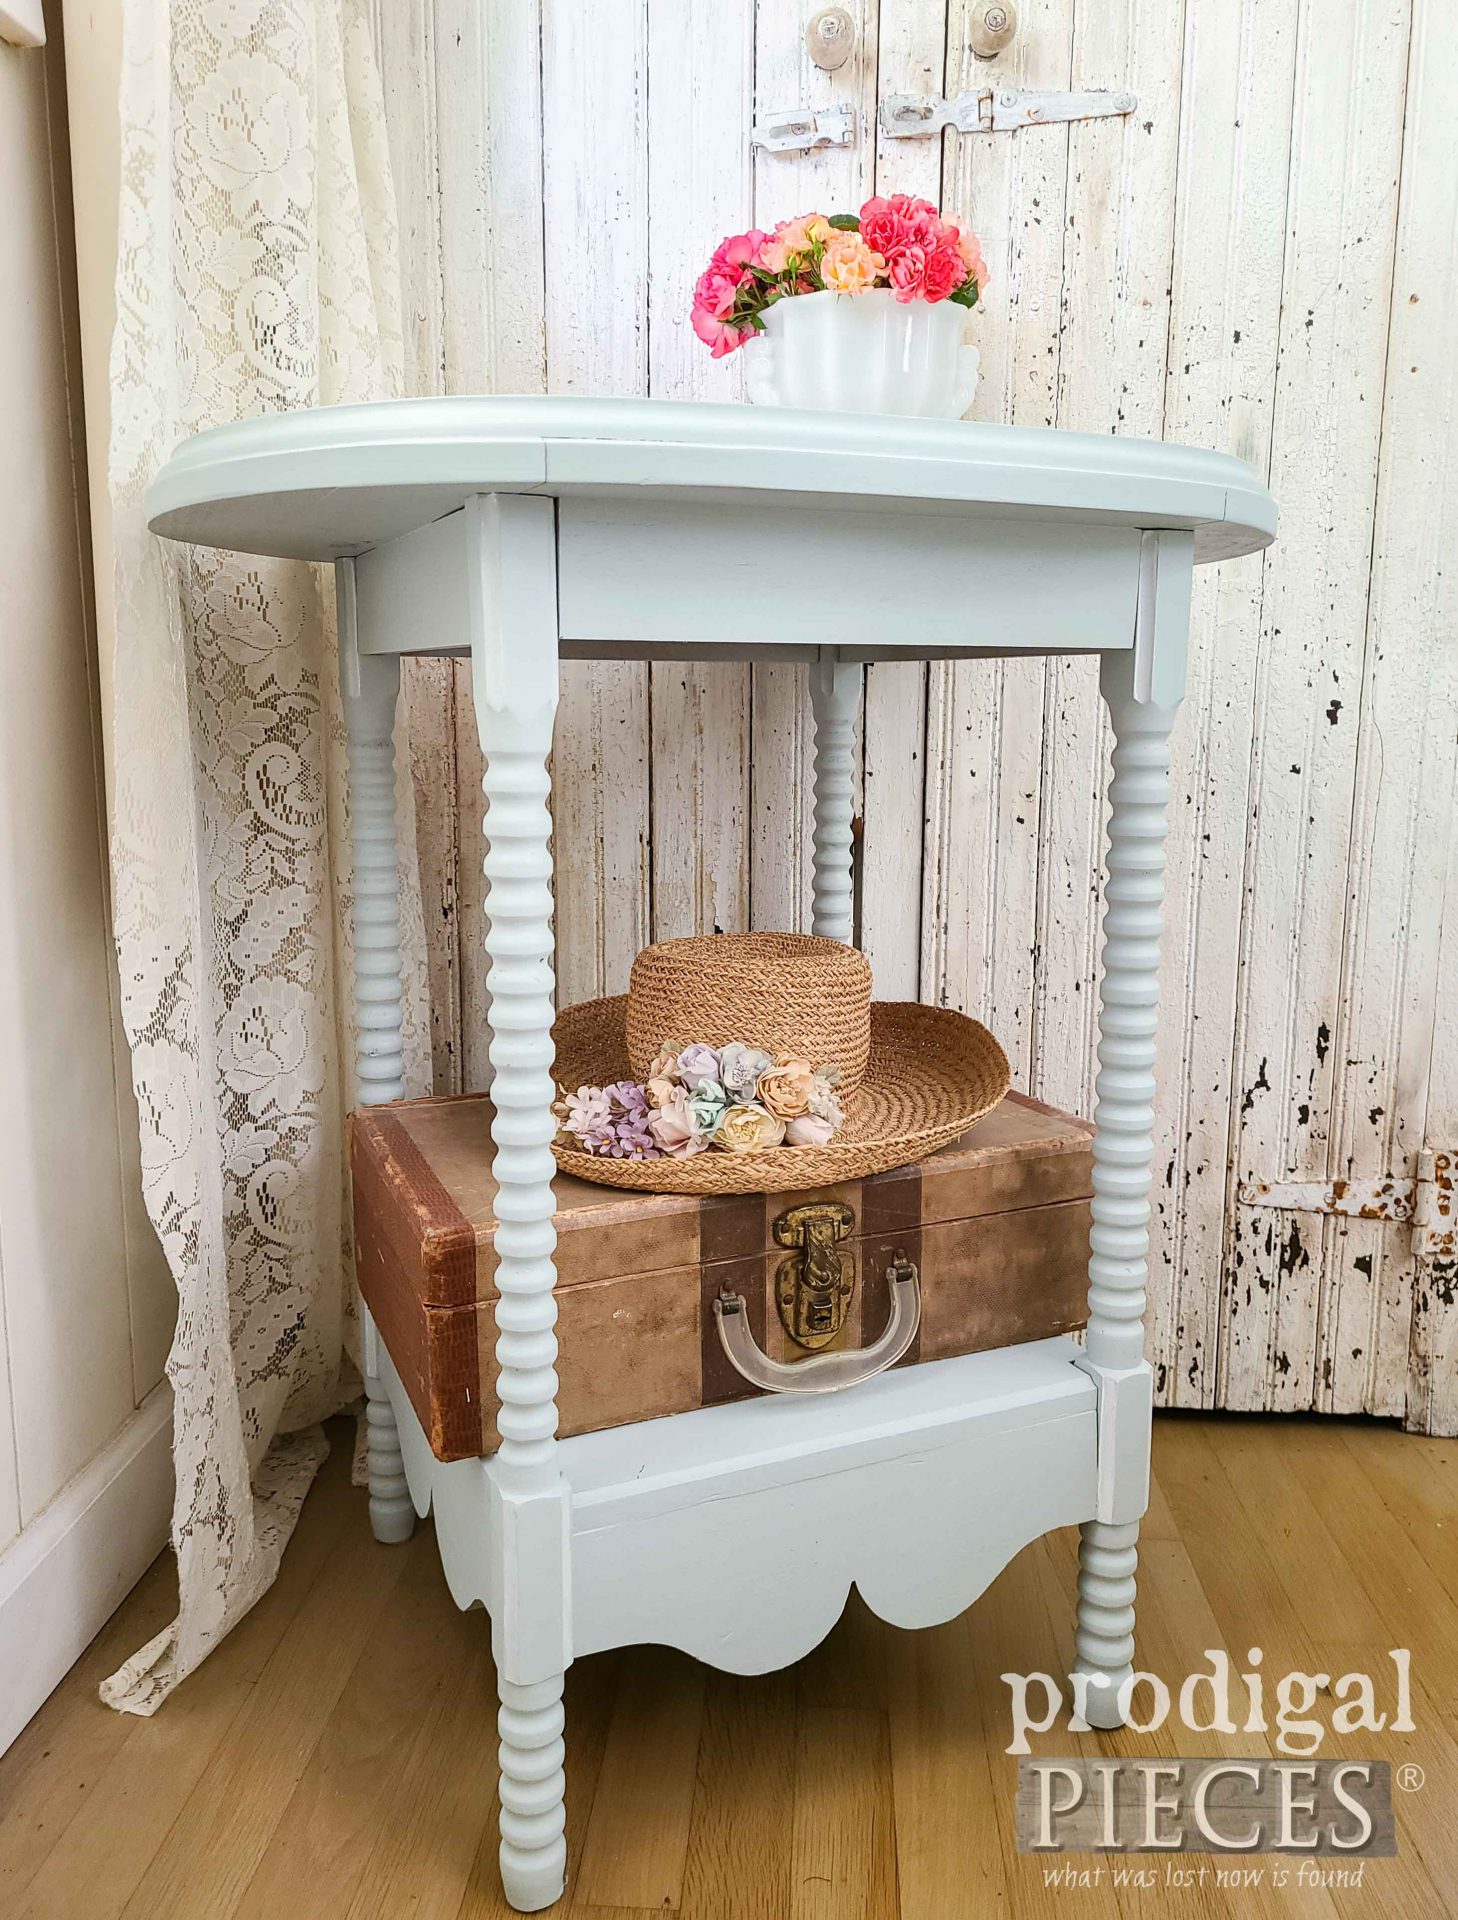 Shabby Chic Side Table with Painted Marble Inset by Larissa of Prodigal Pieces | prodigalpieces.com #prodigalpieces #shabbychic #furntiure